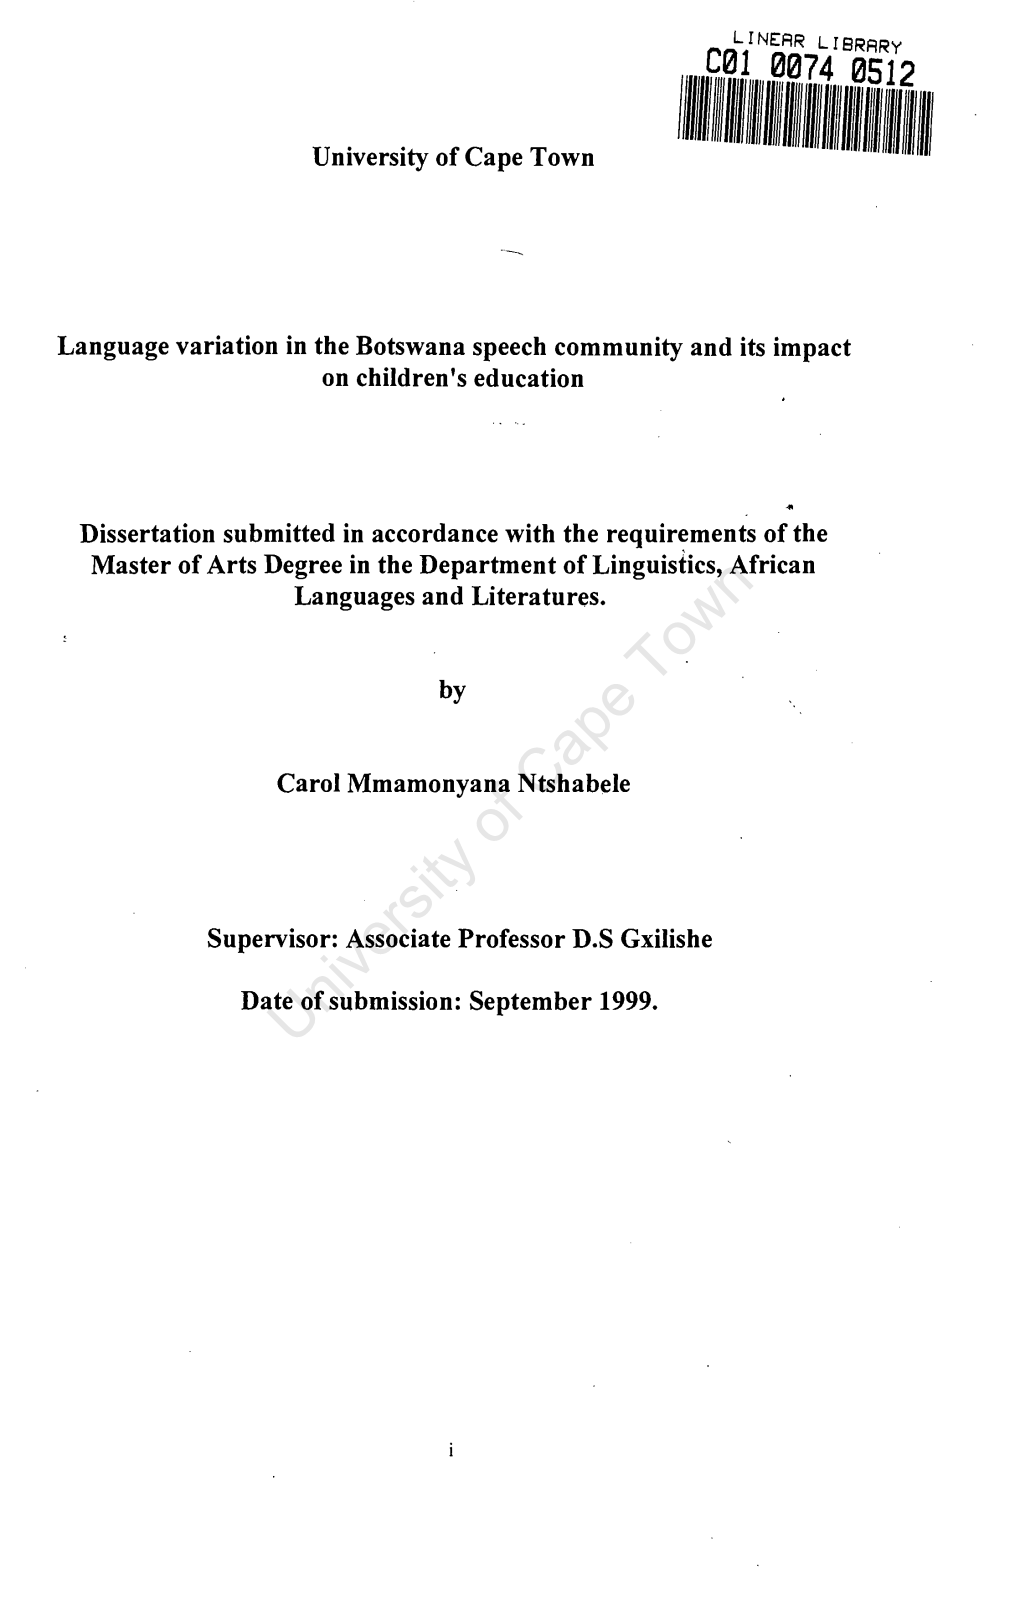 Language Variations in the Botswana Speech Community and Its Impact on Children's Education